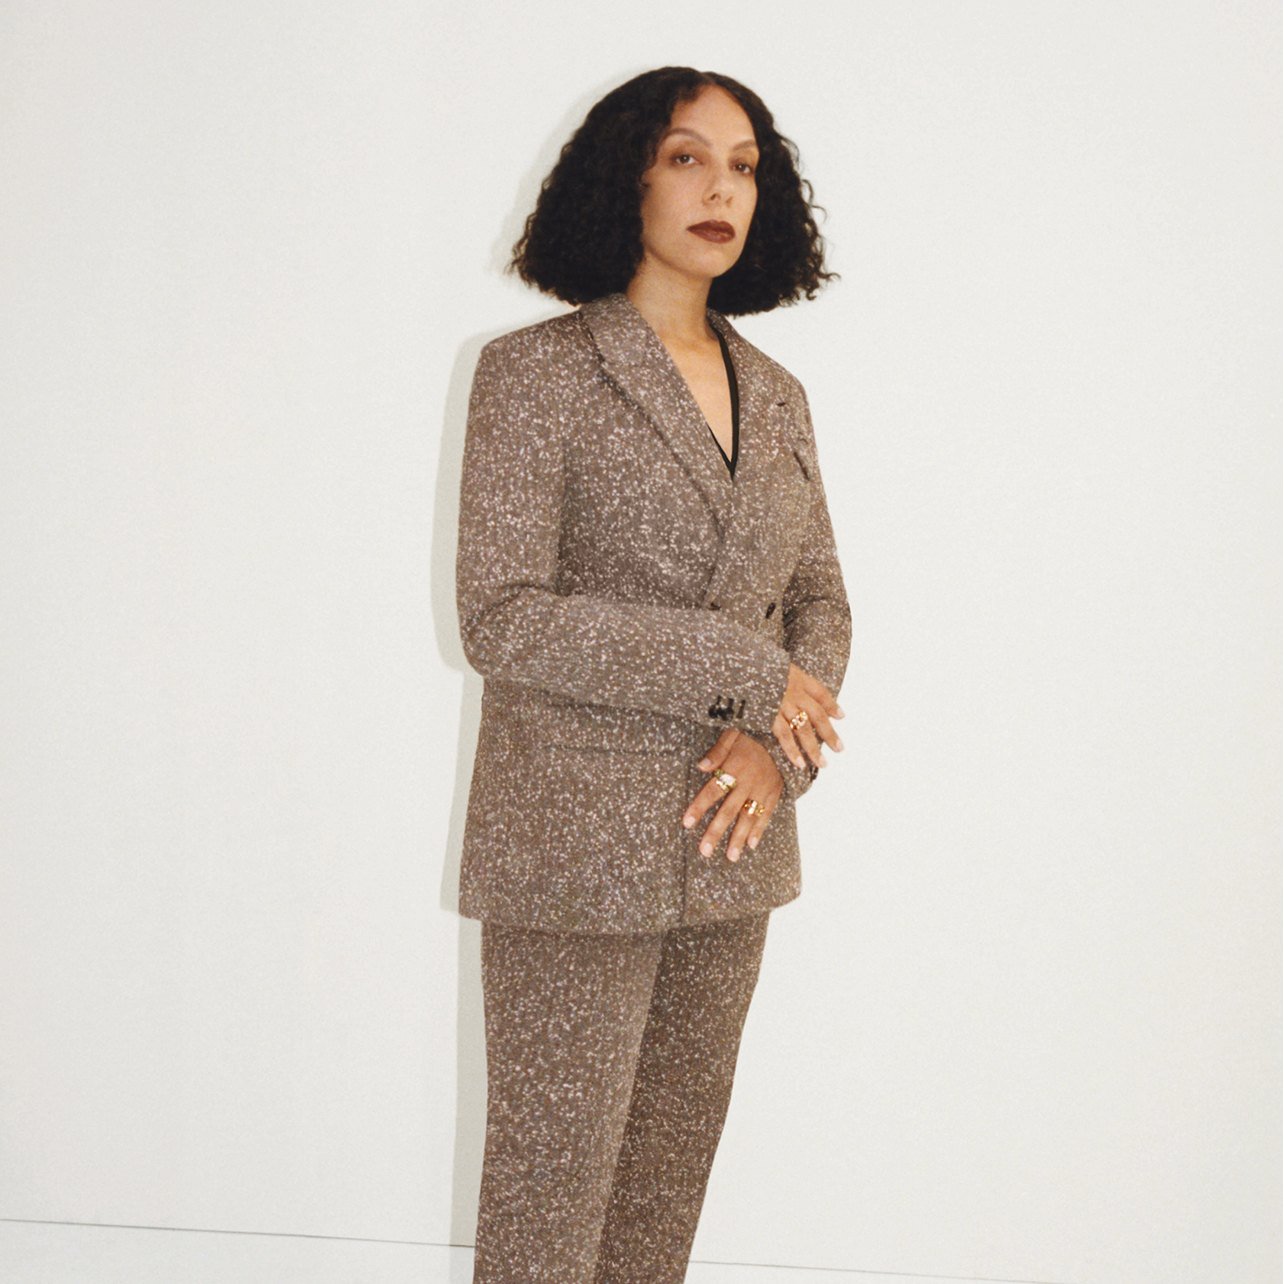 Woman poses wearing a brown pant suit with white speckled detailing